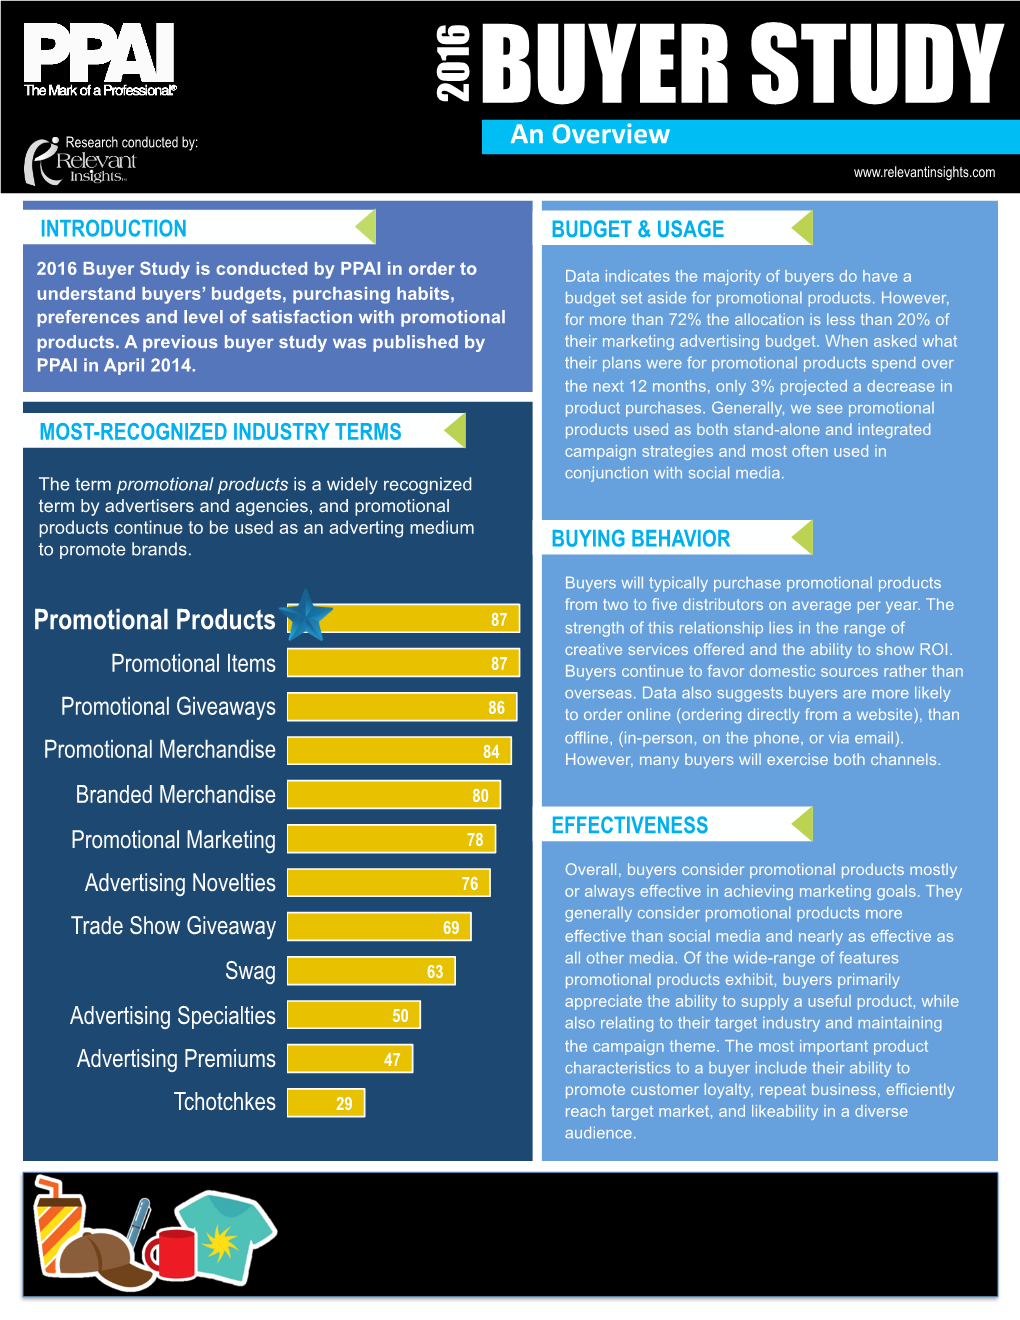 2016 BUYER STUDY Research Conducted By: an Overview